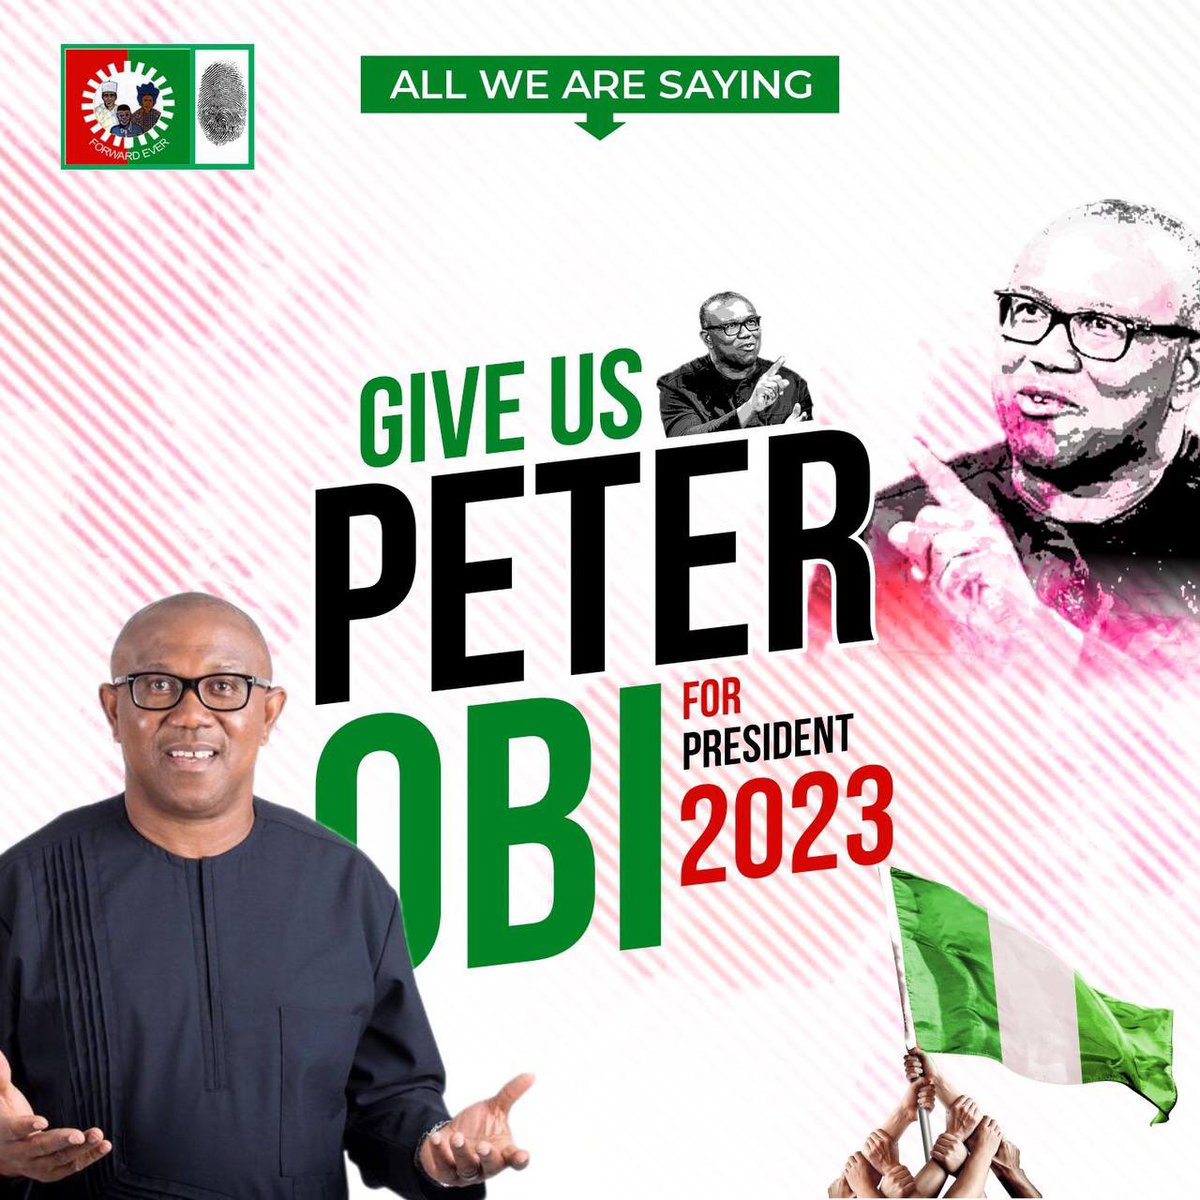 With togetherness the impossible can be possible, it’s time for real changes to be made #SoroSokeDecides #BetterTogether #GreaterNigeria #PeterObi2023 #WeCantContinueLikeThis #YouthVoteCountNG